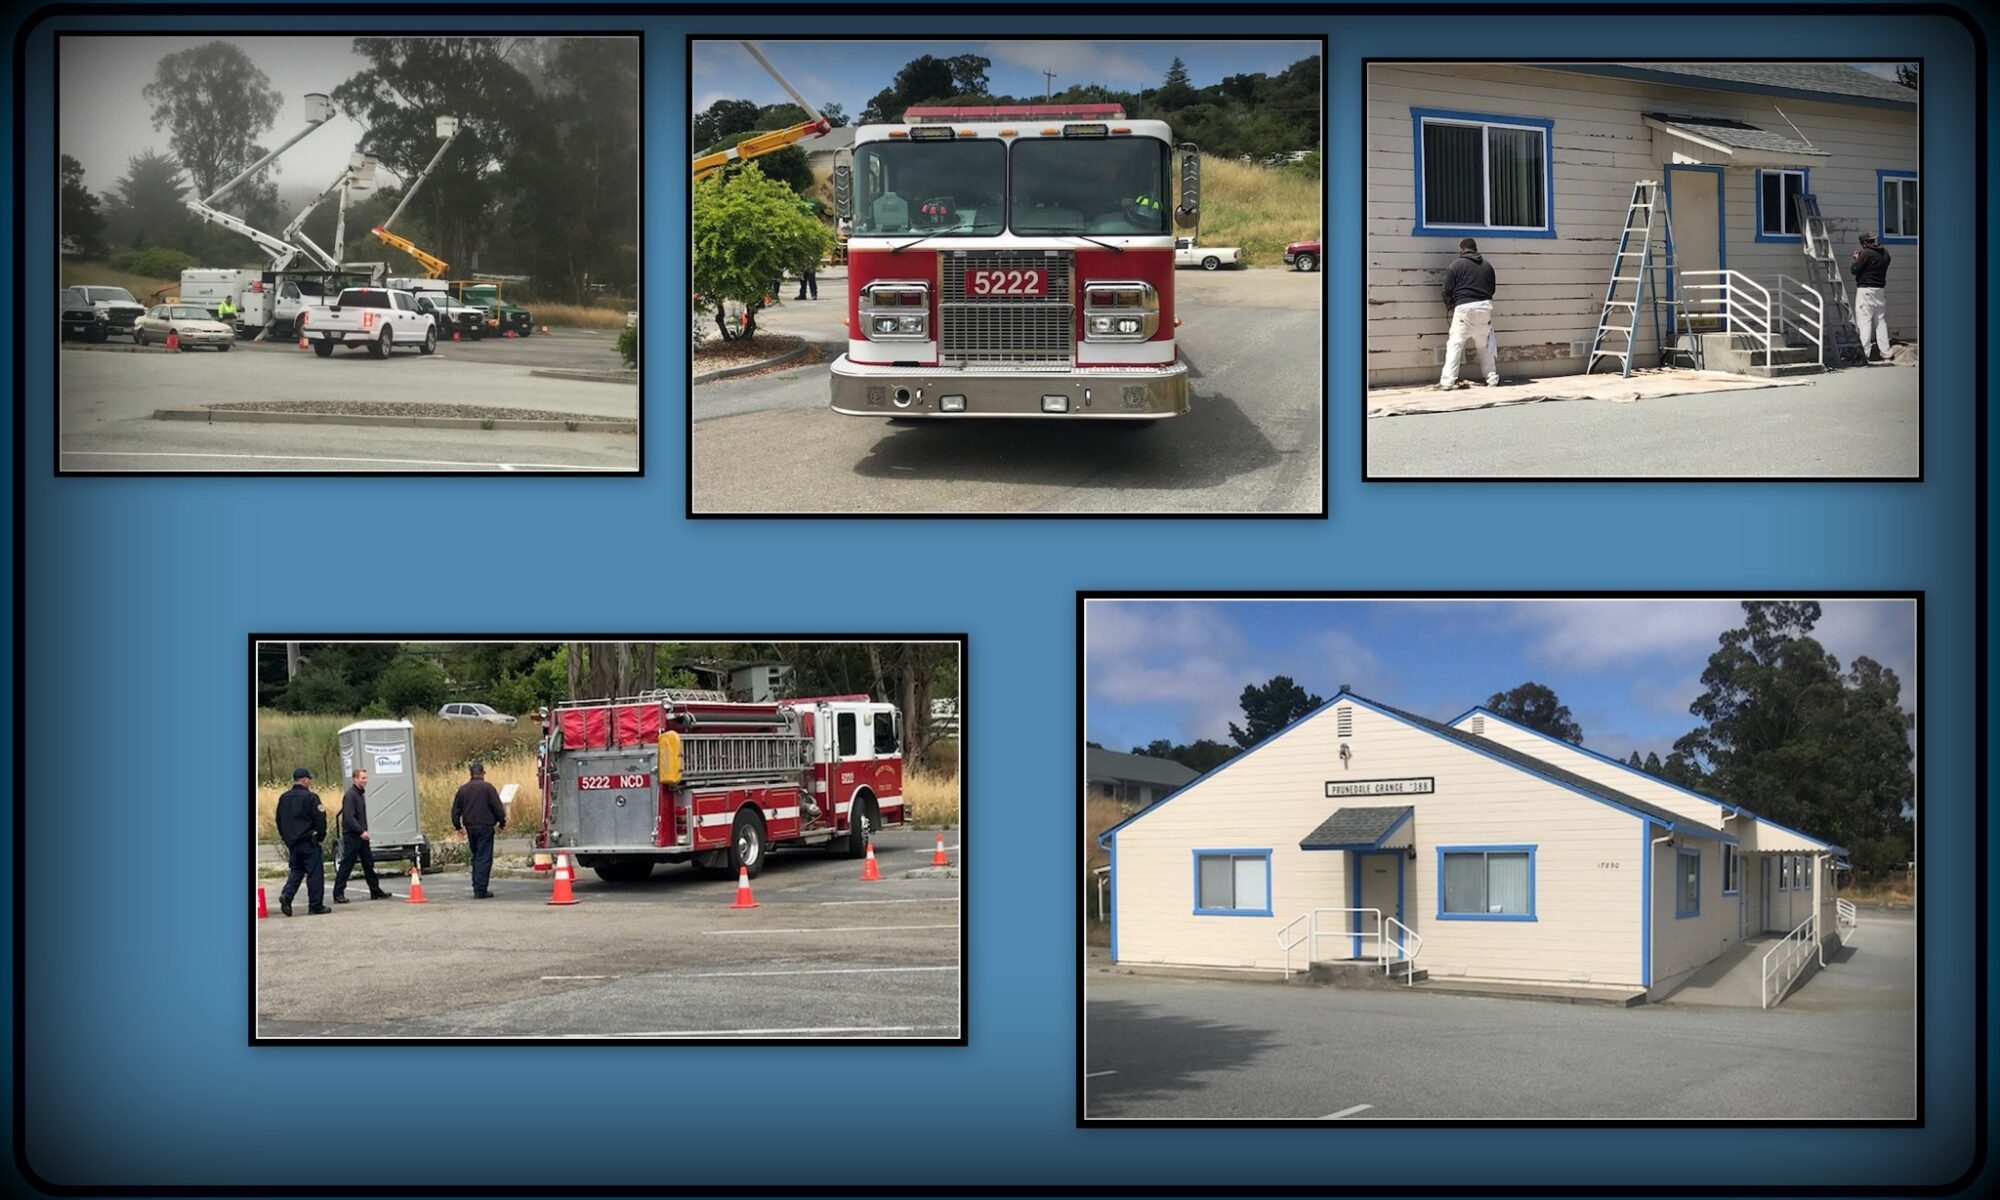 June 2023 Activities Paint Job and Community Services at the Grange #388 Fire Trucks, Large Hall and Tree Trimmers